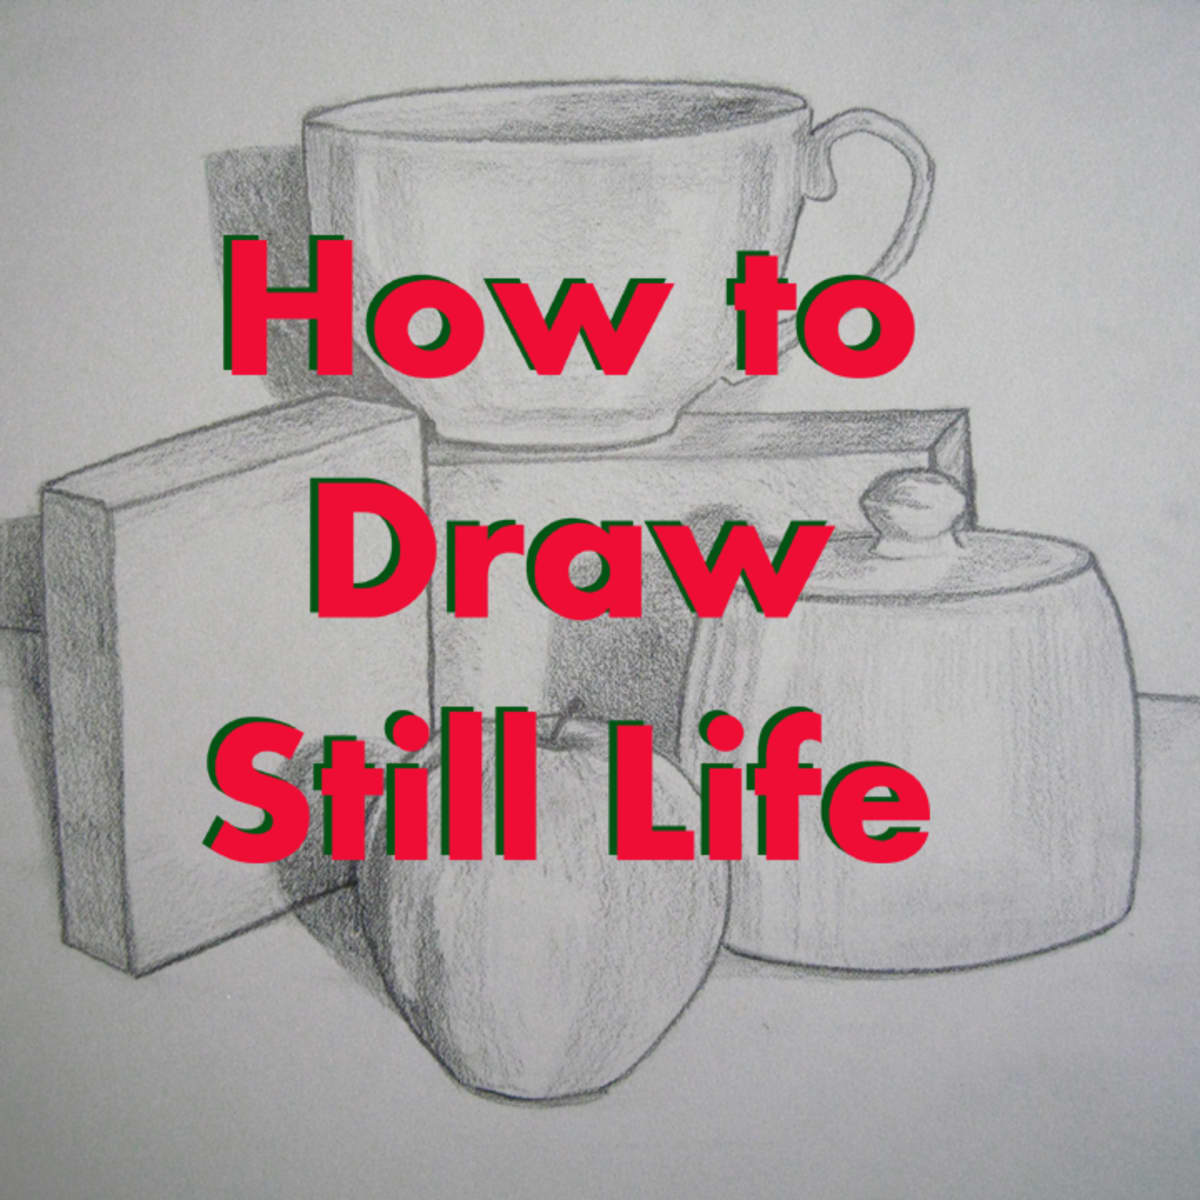 Love Life Drawing: Become Confident with Figure Drawing